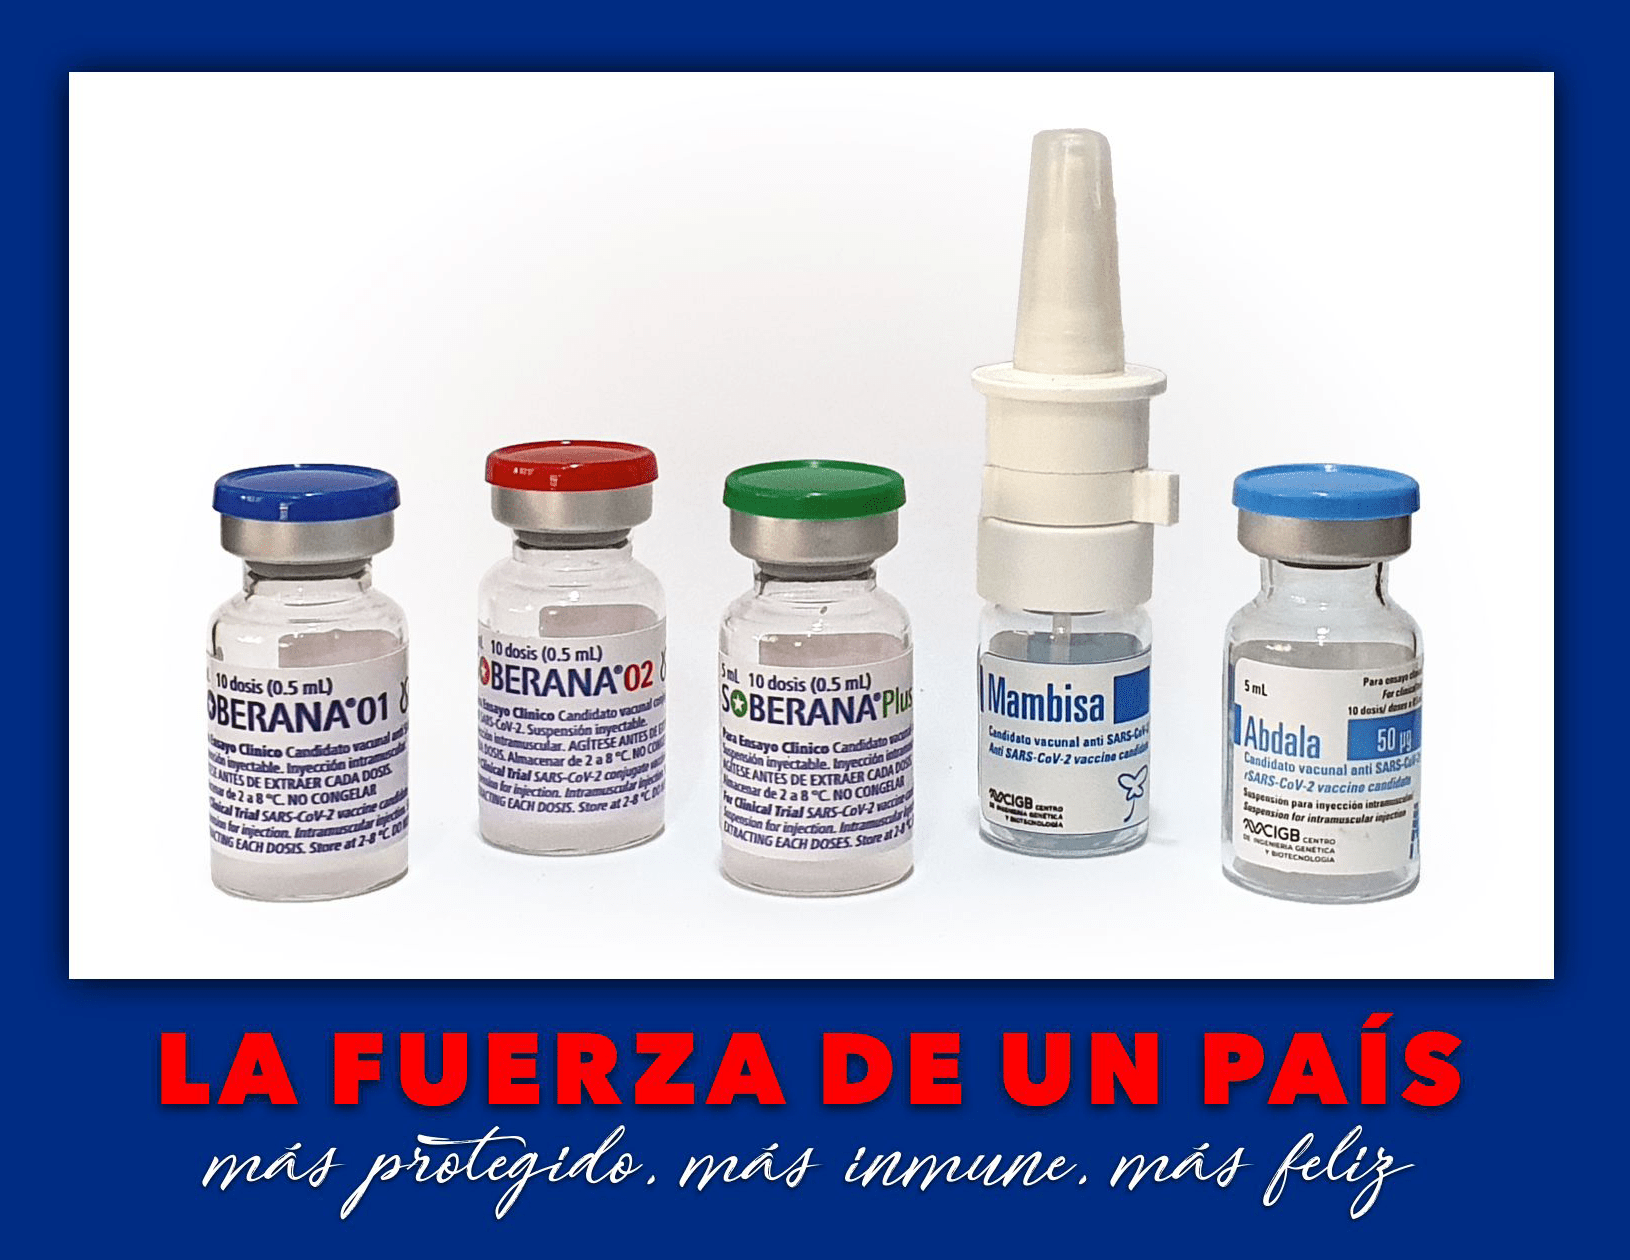 Vaccines for Cuba